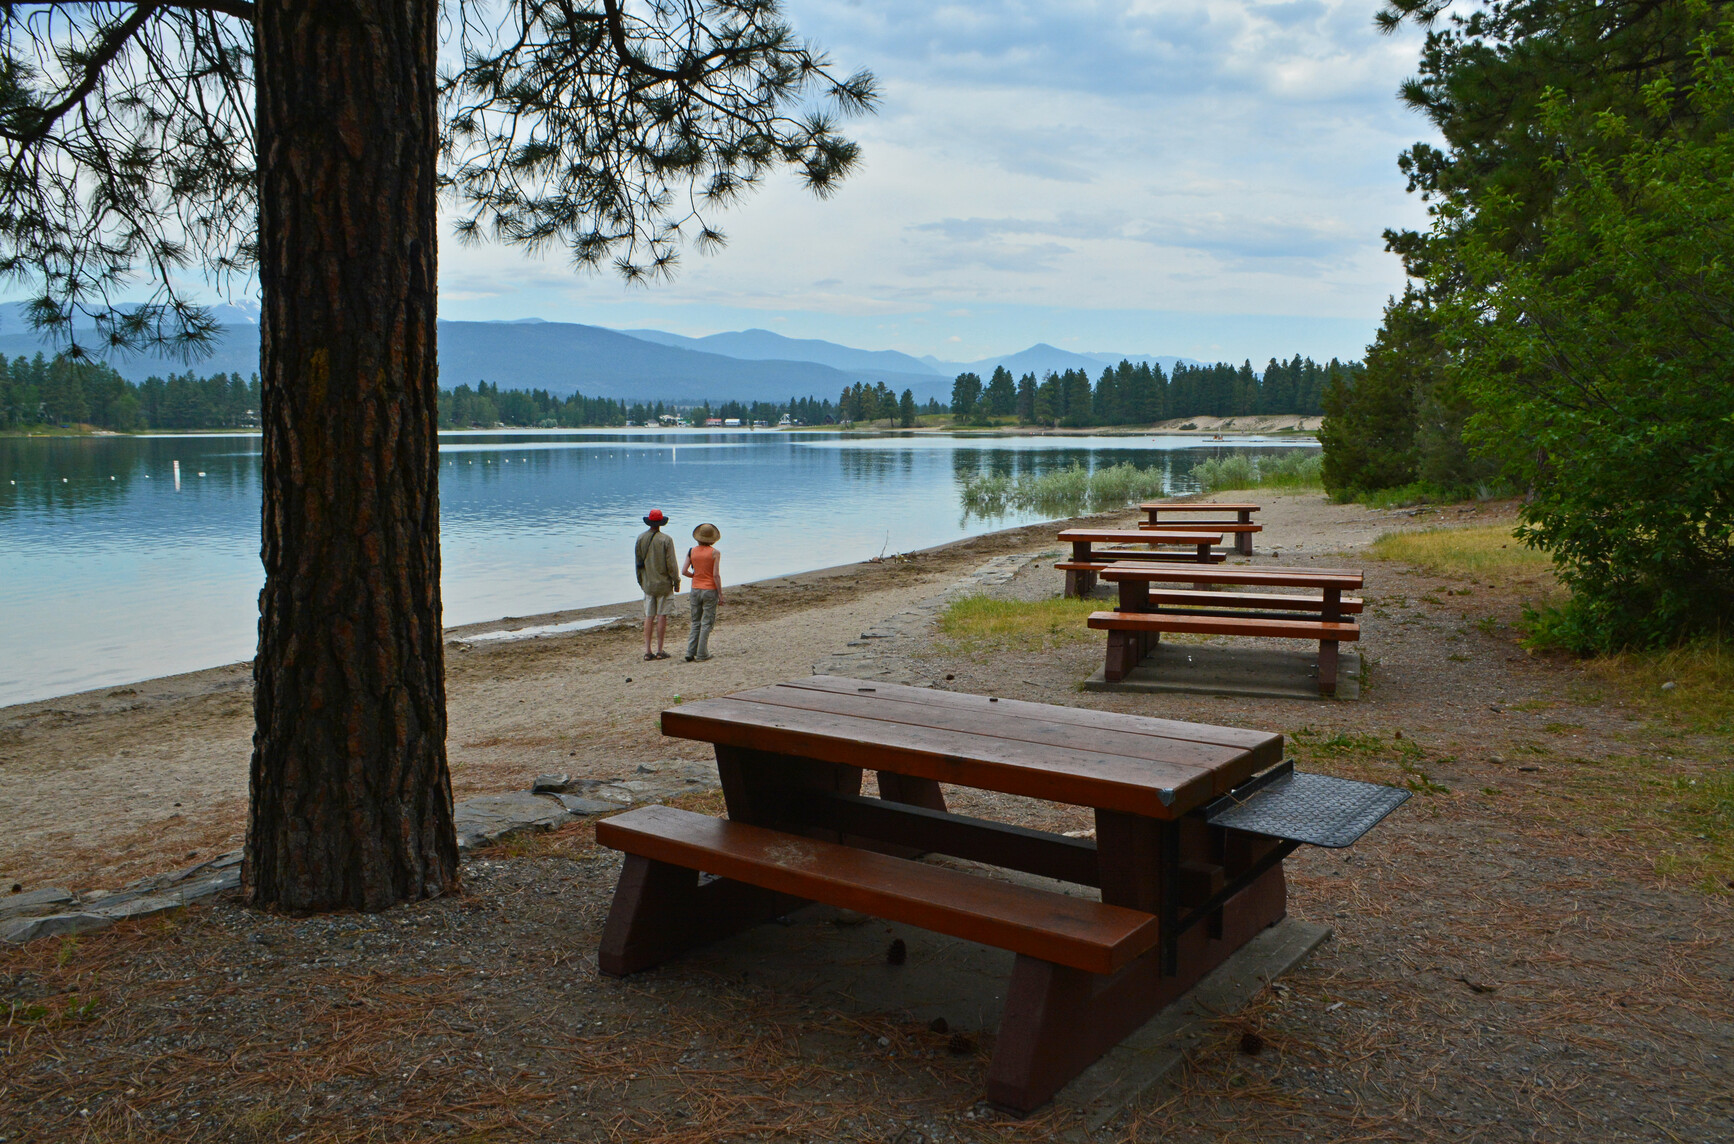 Park visitors standing on the beach beside the picnic area looking at the view.  Mountains are in view on the other side of the lake.